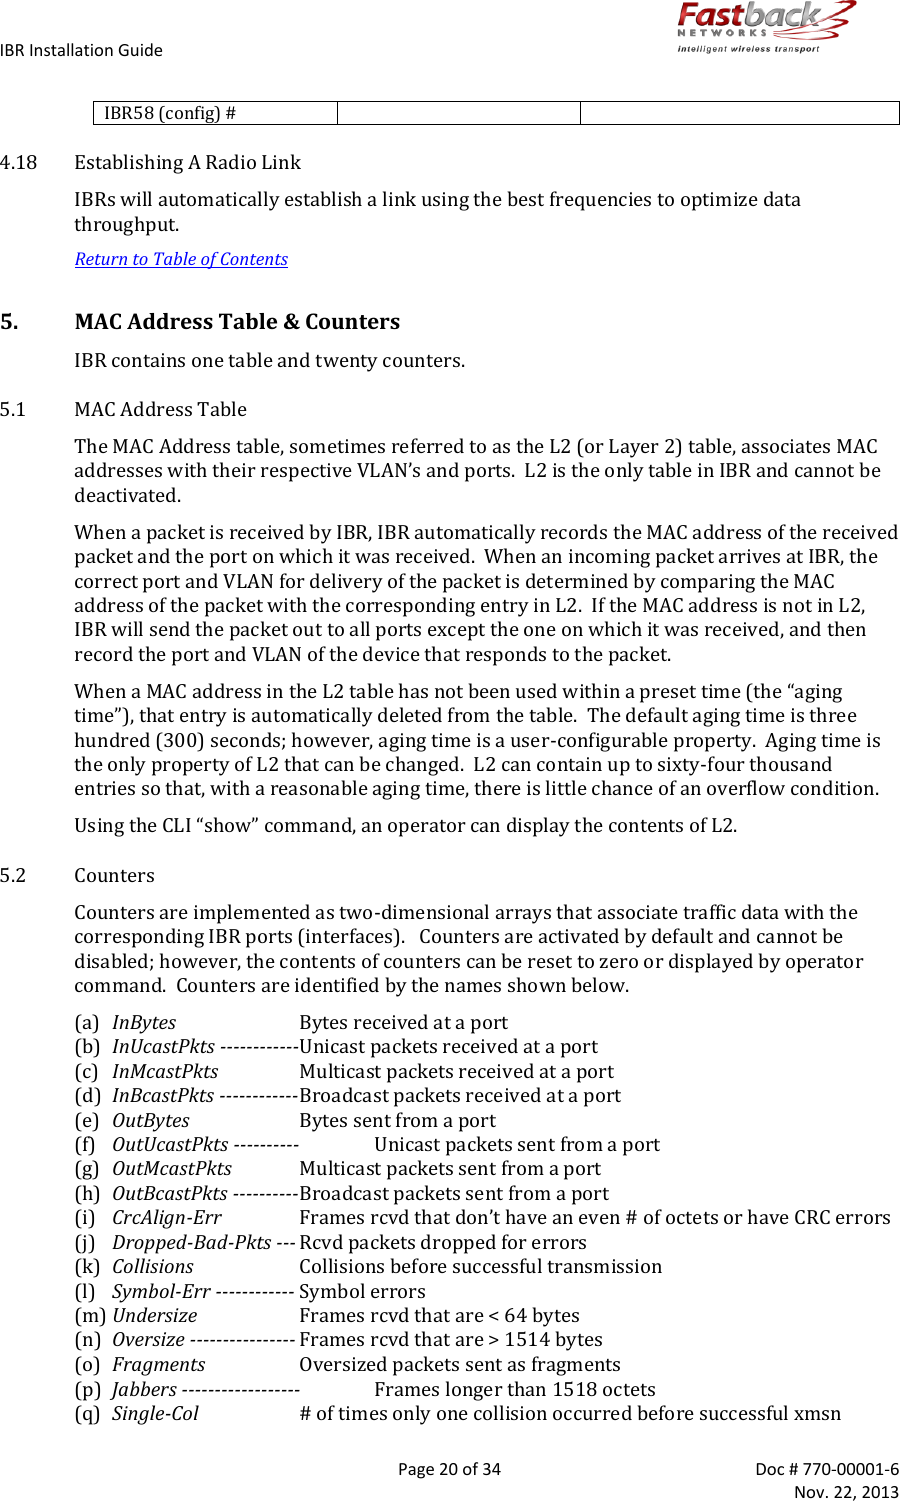 IBR Installation Guide        Page 20 of 34  Doc # 770-00001-6     Nov. 22, 2013   IBR58 (config) #   4.18 Establishing A Radio Link IBRs will automatically establish a link using the best frequencies to optimize data throughput. Return to Table of Contents 5. MAC Address Table &amp; Counters IBR contains one table and twenty counters. 5.1 MAC Address Table The MAC Address table, sometimes referred to as the L2 (or Layer 2) table, associates MAC addresses with their respective VLAN’s and ports.  L2 is the only table in IBR and cannot be deactivated.  When a packet is received by IBR, IBR automatically records the MAC address of the received packet and the port on which it was received.  When an incoming packet arrives at IBR, the correct port and VLAN for delivery of the packet is determined by comparing the MAC address of the packet with the corresponding entry in L2.  If the MAC address is not in L2, IBR will send the packet out to all ports except the one on which it was received, and then record the port and VLAN of the device that responds to the packet. When a MAC address in the L2 table has not been used within a preset time (the “aging time”), that entry is automatically deleted from the table.  The default aging time is three hundred (300) seconds; however, aging time is a user-configurable property.  Aging time is the only property of L2 that can be changed.  L2 can contain up to sixty-four thousand entries so that, with a reasonable aging time, there is little chance of an overflow condition. Using the CLI “show” command, an operator can display the contents of L2. 5.2 Counters Counters are implemented as two-dimensional arrays that associate traffic data with the corresponding IBR ports (interfaces).   Counters are activated by default and cannot be disabled; however, the contents of counters can be reset to zero or displayed by operator command.  Counters are identified by the names shown below.  (a) InBytes  Bytes received at a port (b) InUcastPkts ------------Unicast packets received at a port (c) InMcastPkts  Multicast packets received at a port (d) InBcastPkts ------------ Broadcast packets received at a port (e) OutBytes  Bytes sent from a port (f) OutUcastPkts ----------  Unicast packets sent from a port (g) OutMcastPkts  Multicast packets sent from a port (h) OutBcastPkts ---------- Broadcast packets sent from a port (i) CrcAlign-Err Frames rcvd that don’t have an even # of octets or have CRC errors (j) Dropped-Bad-Pkts --- Rcvd packets dropped for errors (k) Collisions  Collisions before successful transmission (l) Symbol-Err ------------ Symbol errors (m) Undersize  Frames rcvd that are &lt; 64 bytes (n) Oversize ---------------- Frames rcvd that are &gt; 1514 bytes (o) Fragments  Oversized packets sent as fragments (p) Jabbers ------------------  Frames longer than 1518 octets (q) Single-Col  # of times only one collision occurred before successful xmsn 